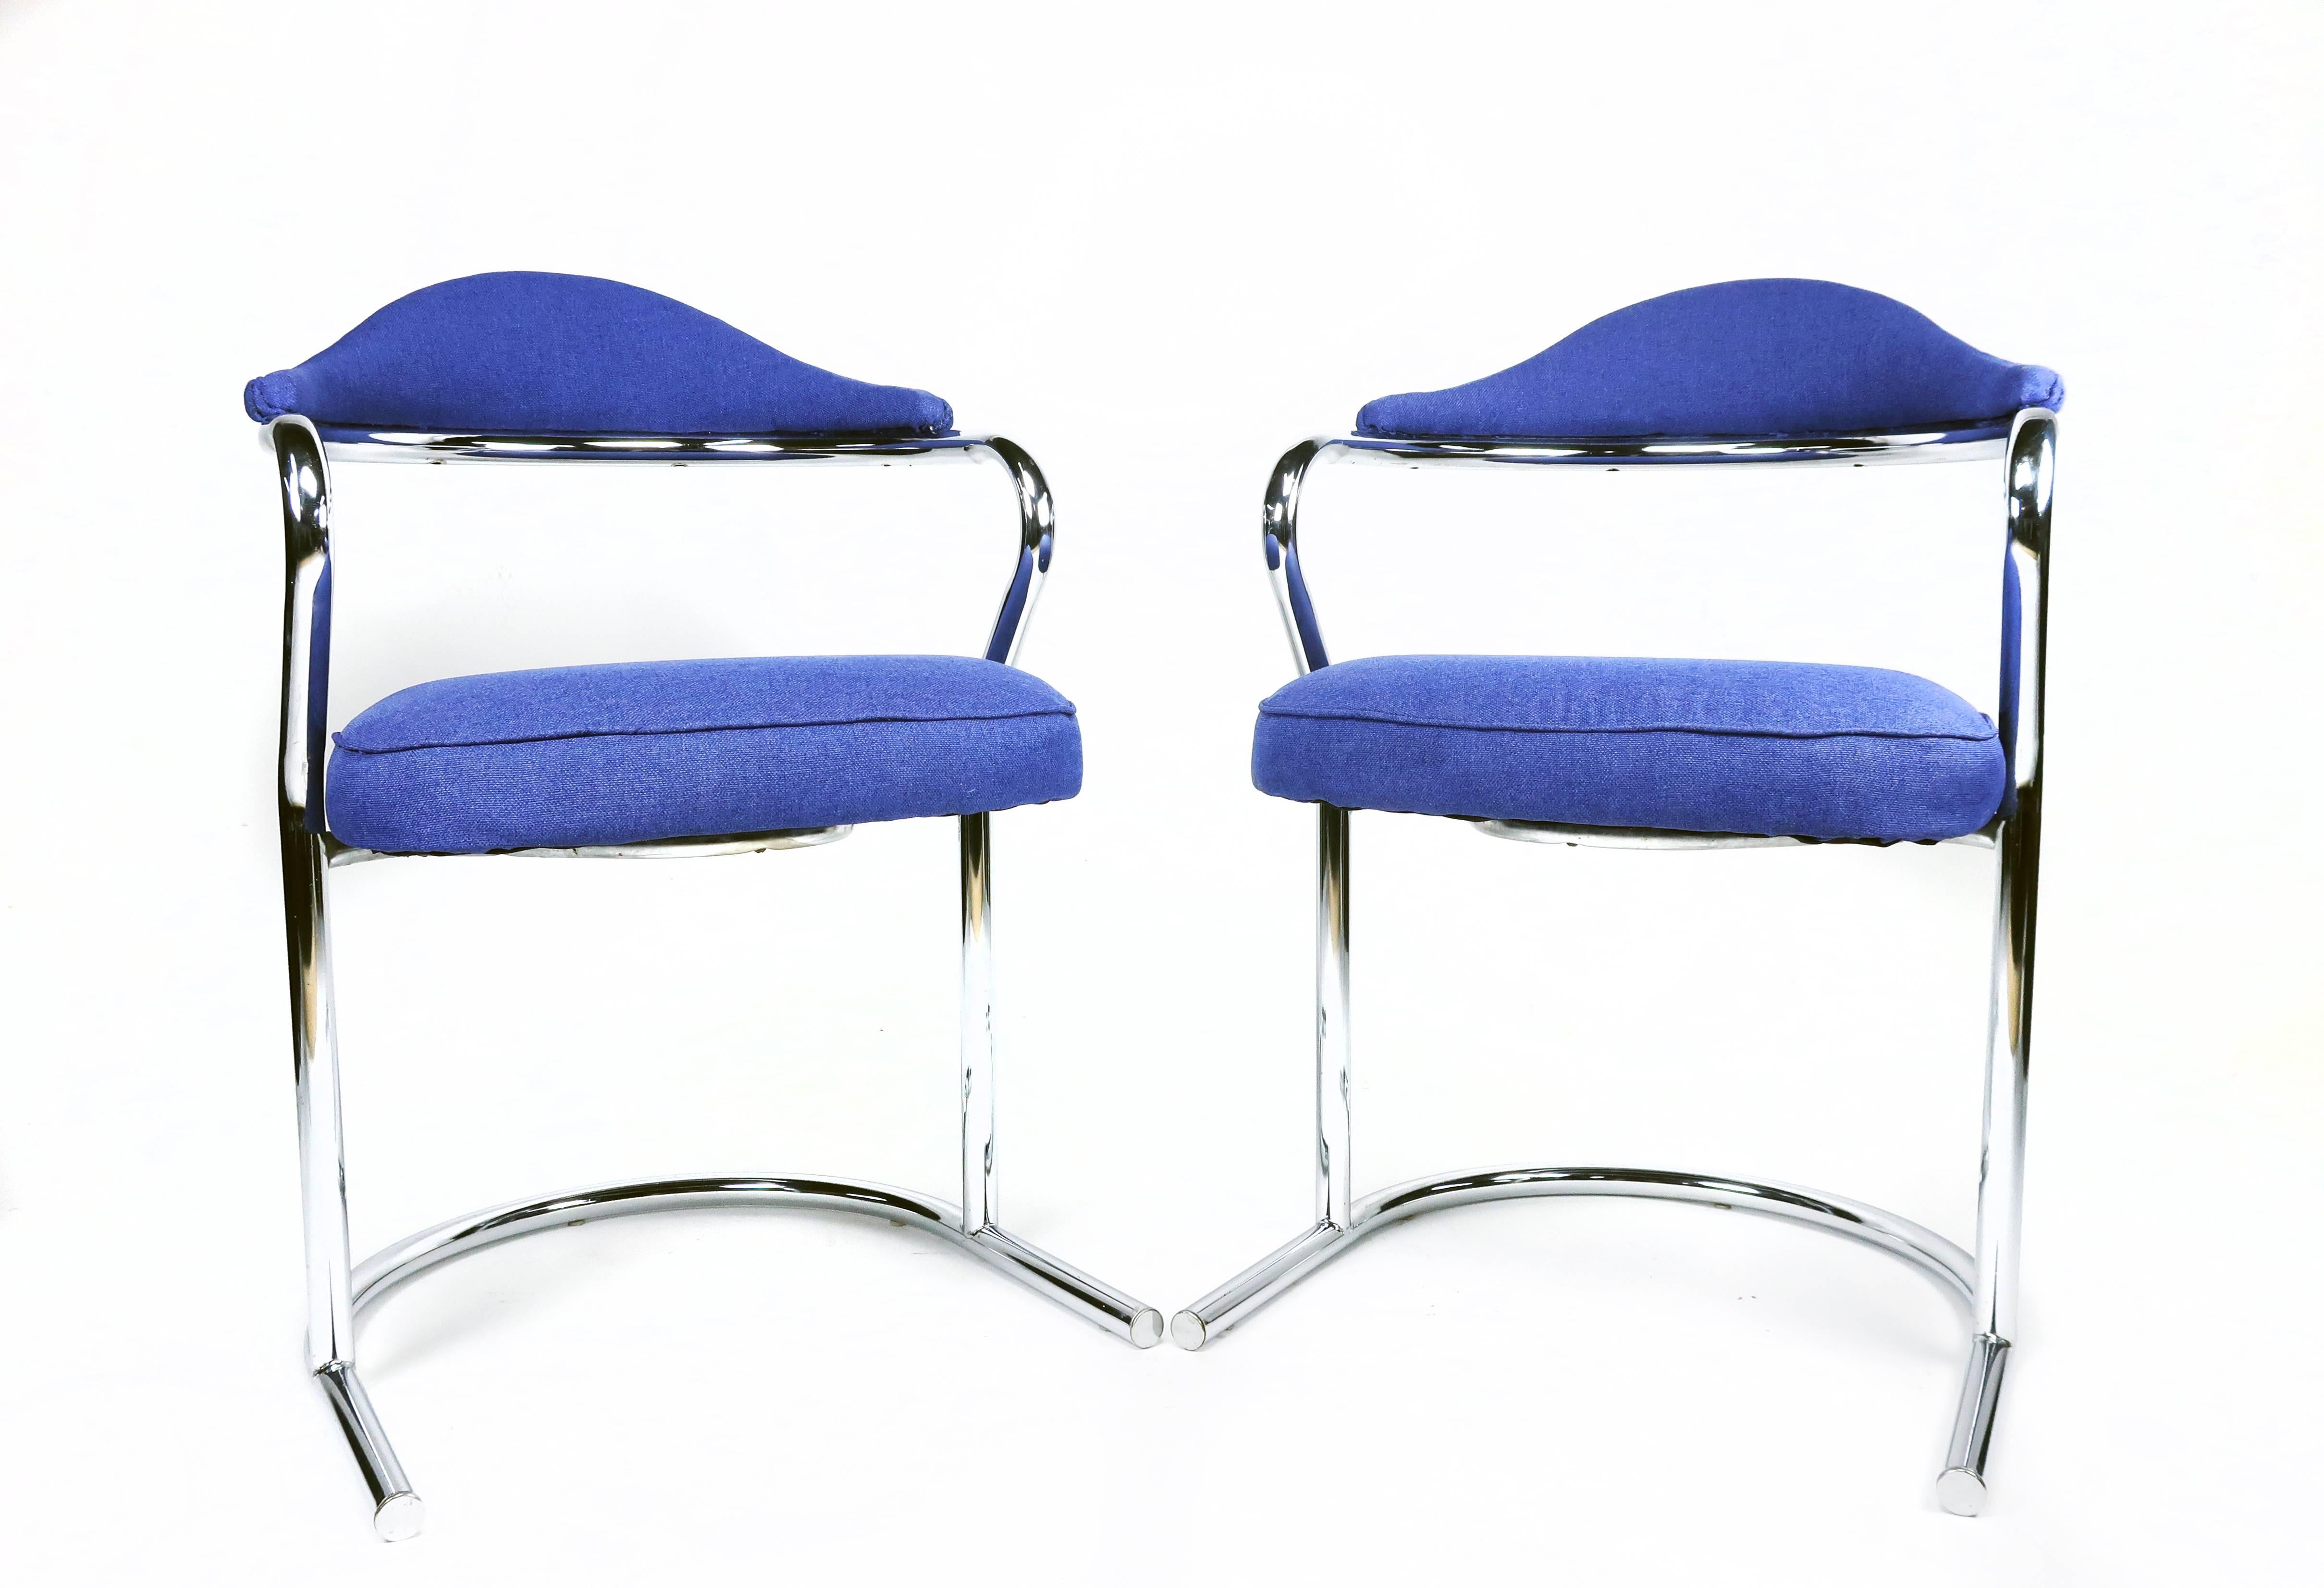 Pair of tubular chrome cantilevered armchairs in the style of Anton Lorenz for Thonet. Designed in the 1930s, these midcentury chairs remain in demand and fit perfectly with today's style trends. Sculpted polished chrome design with a minimal modern